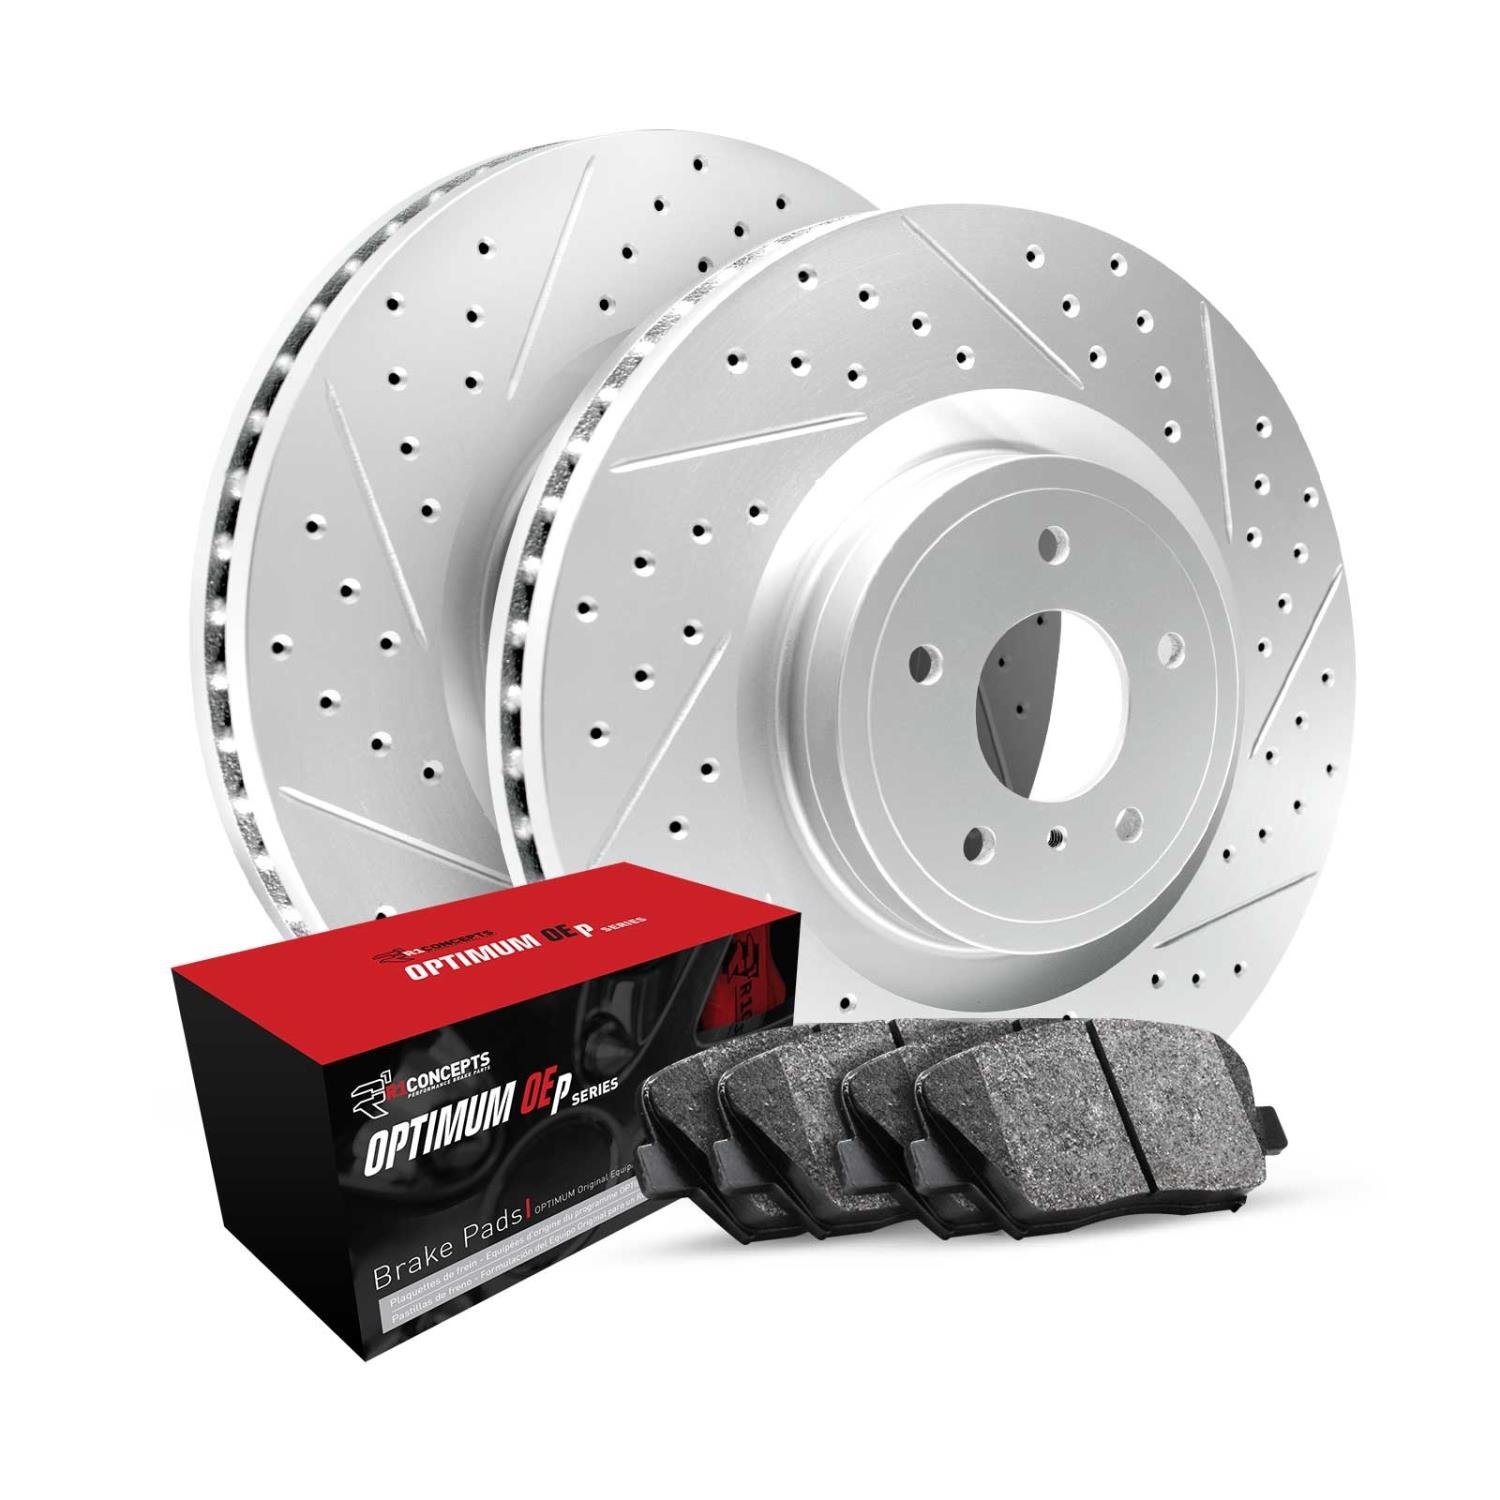 GEO-Carbon Drilled & Slotted Brake Rotor Set w/Optimum OE Pads, 2009-2013 Fits Multiple Makes/Models, Position: Front & Rear